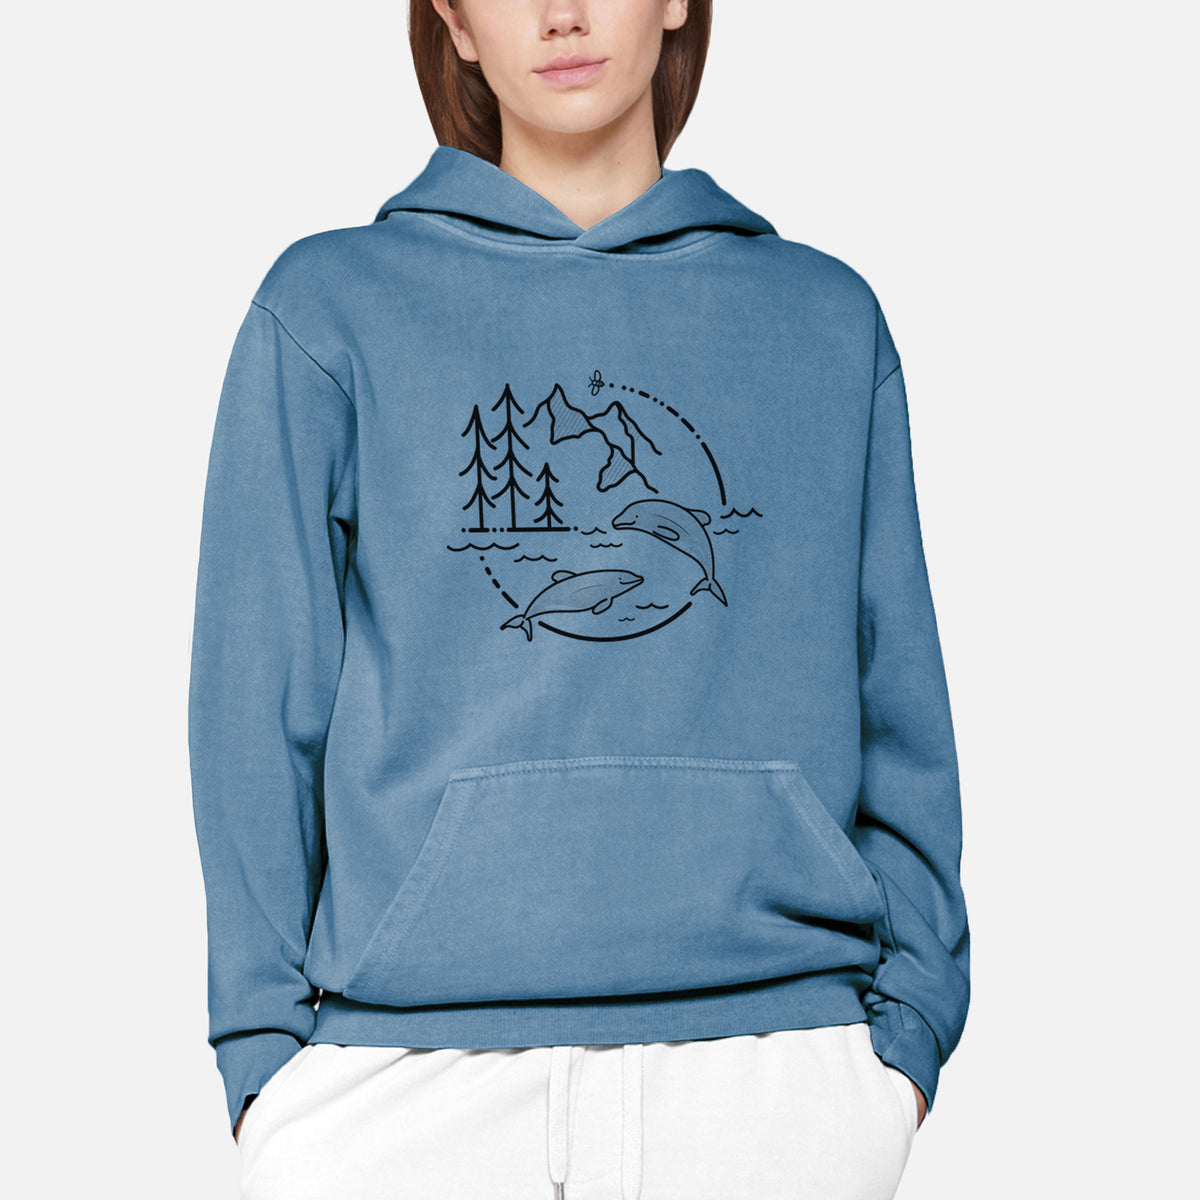 It&#39;s All Connected - Maui Dolphins  - Urban Heavyweight Hoodie